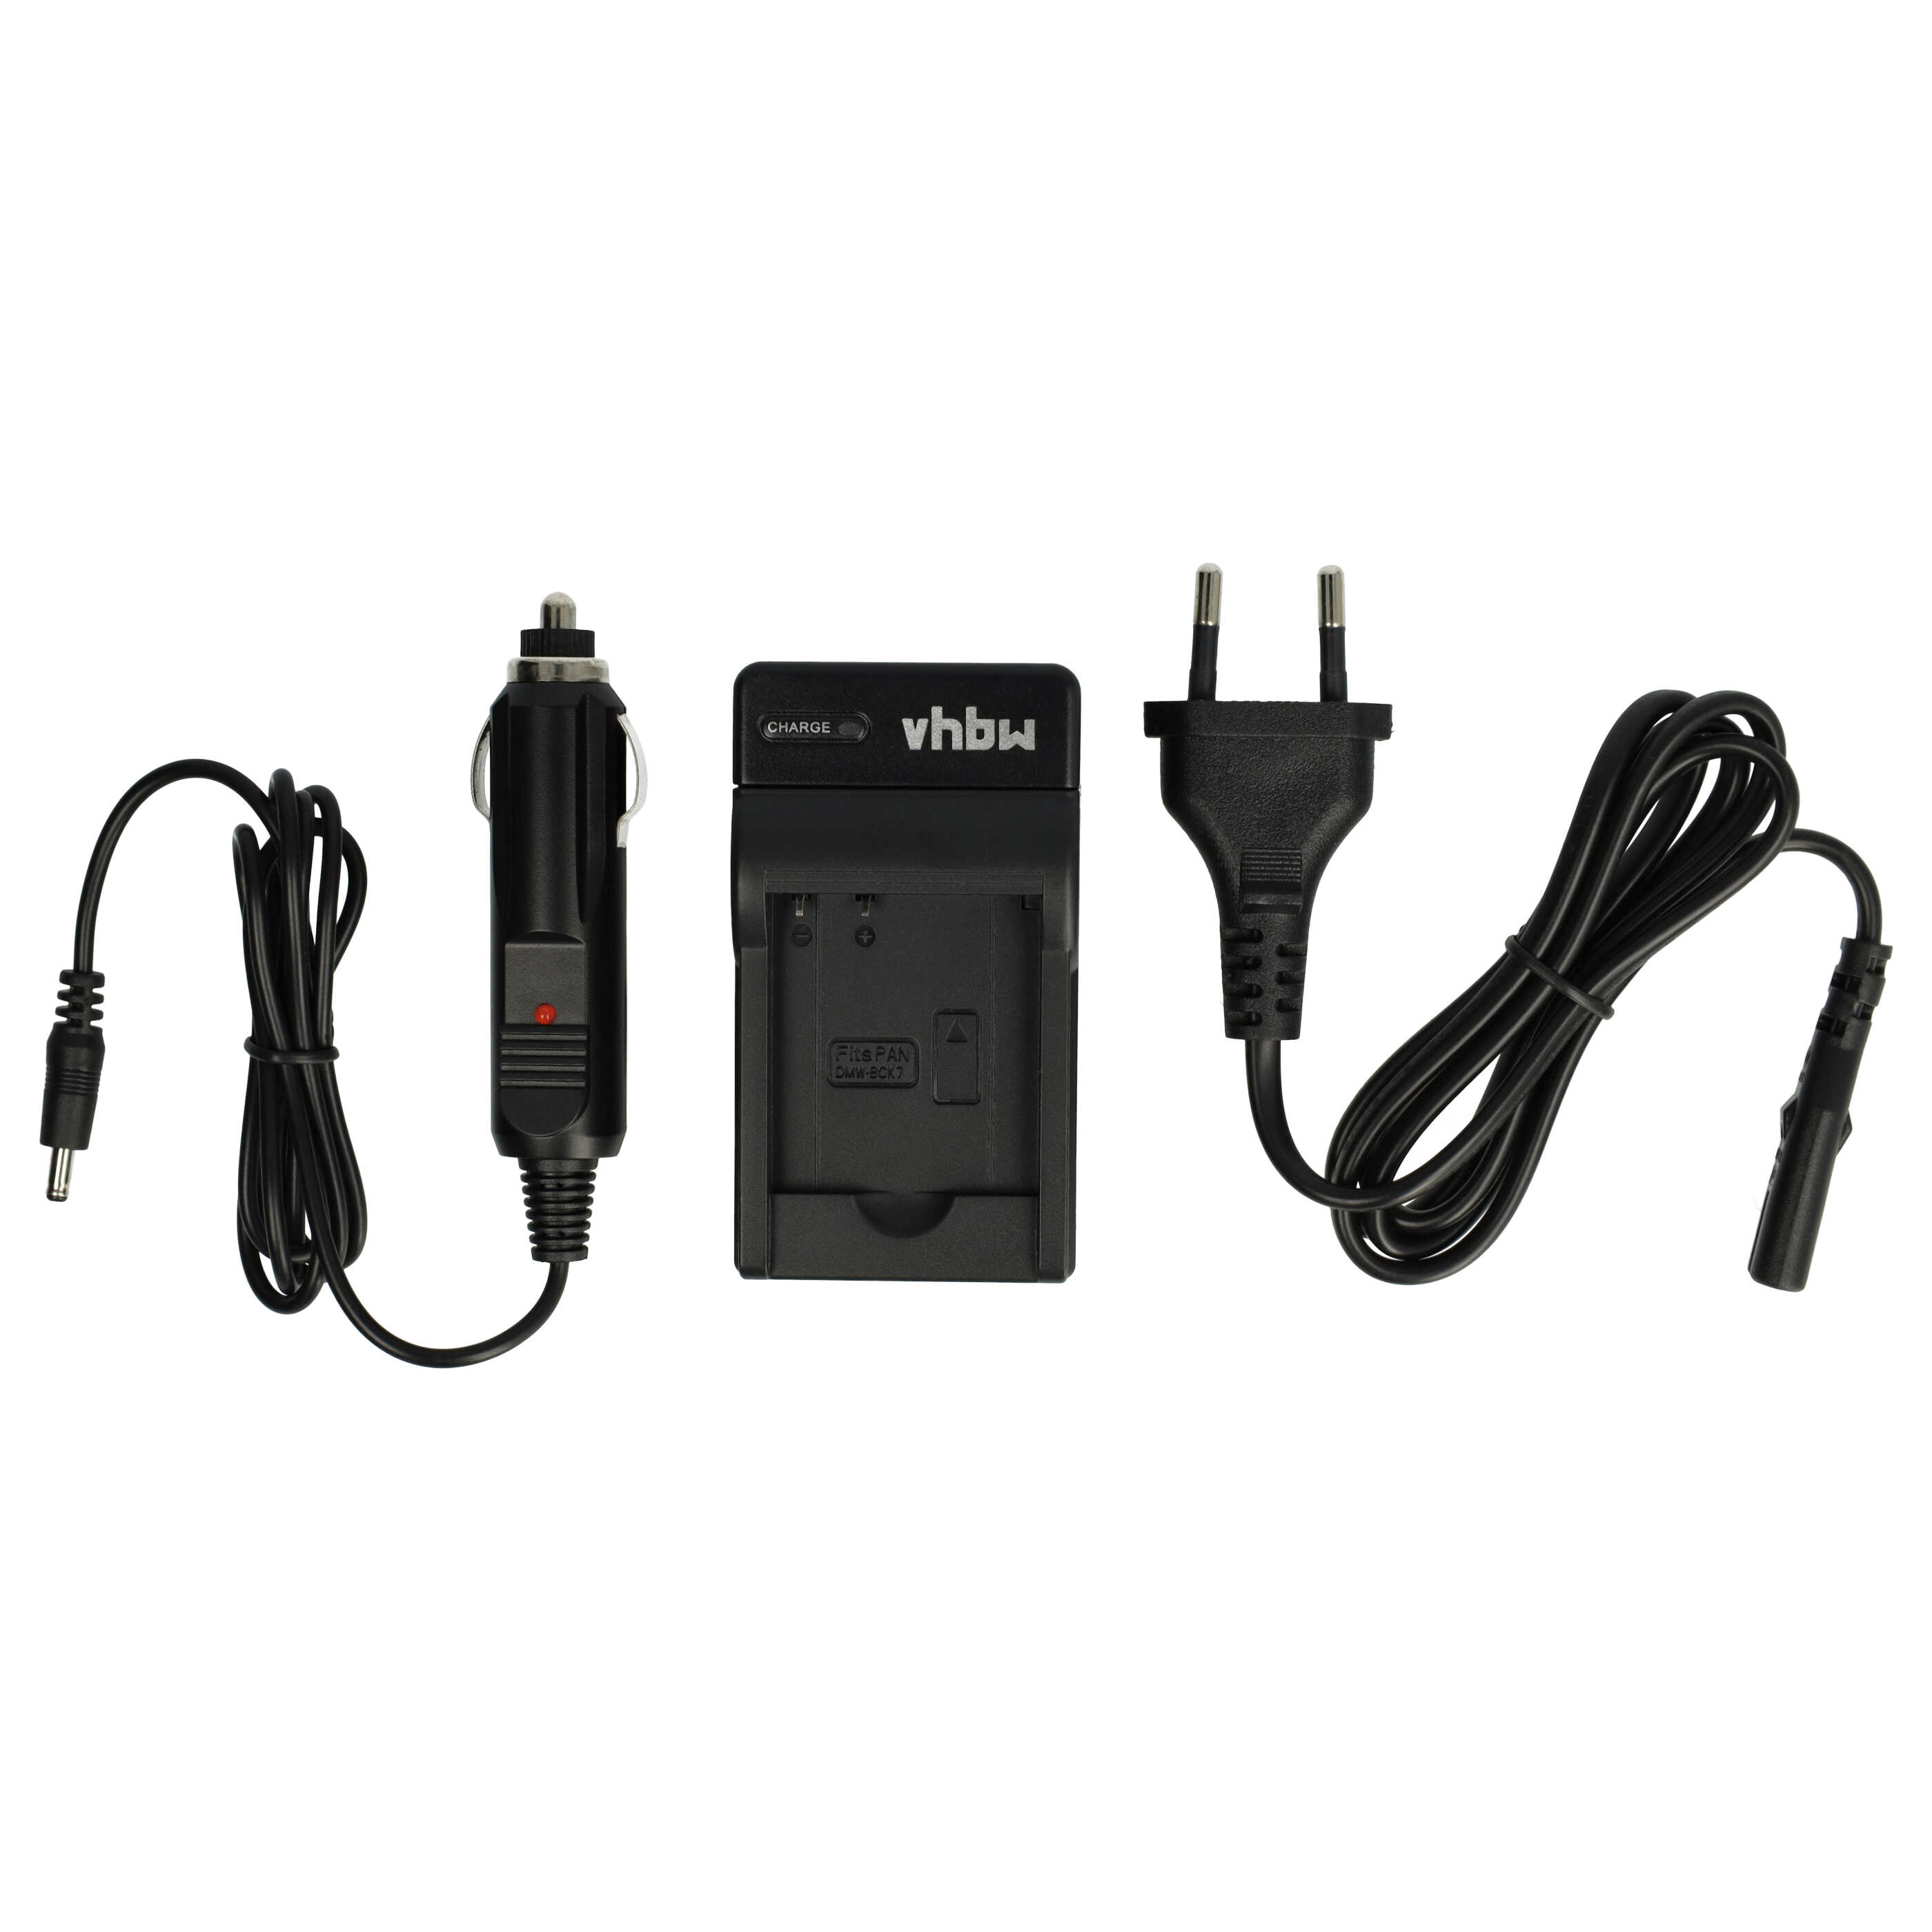 Battery Charger suitable for Lumix DMC-FH2 Camera etc. - 0.6 A, 4.2 V